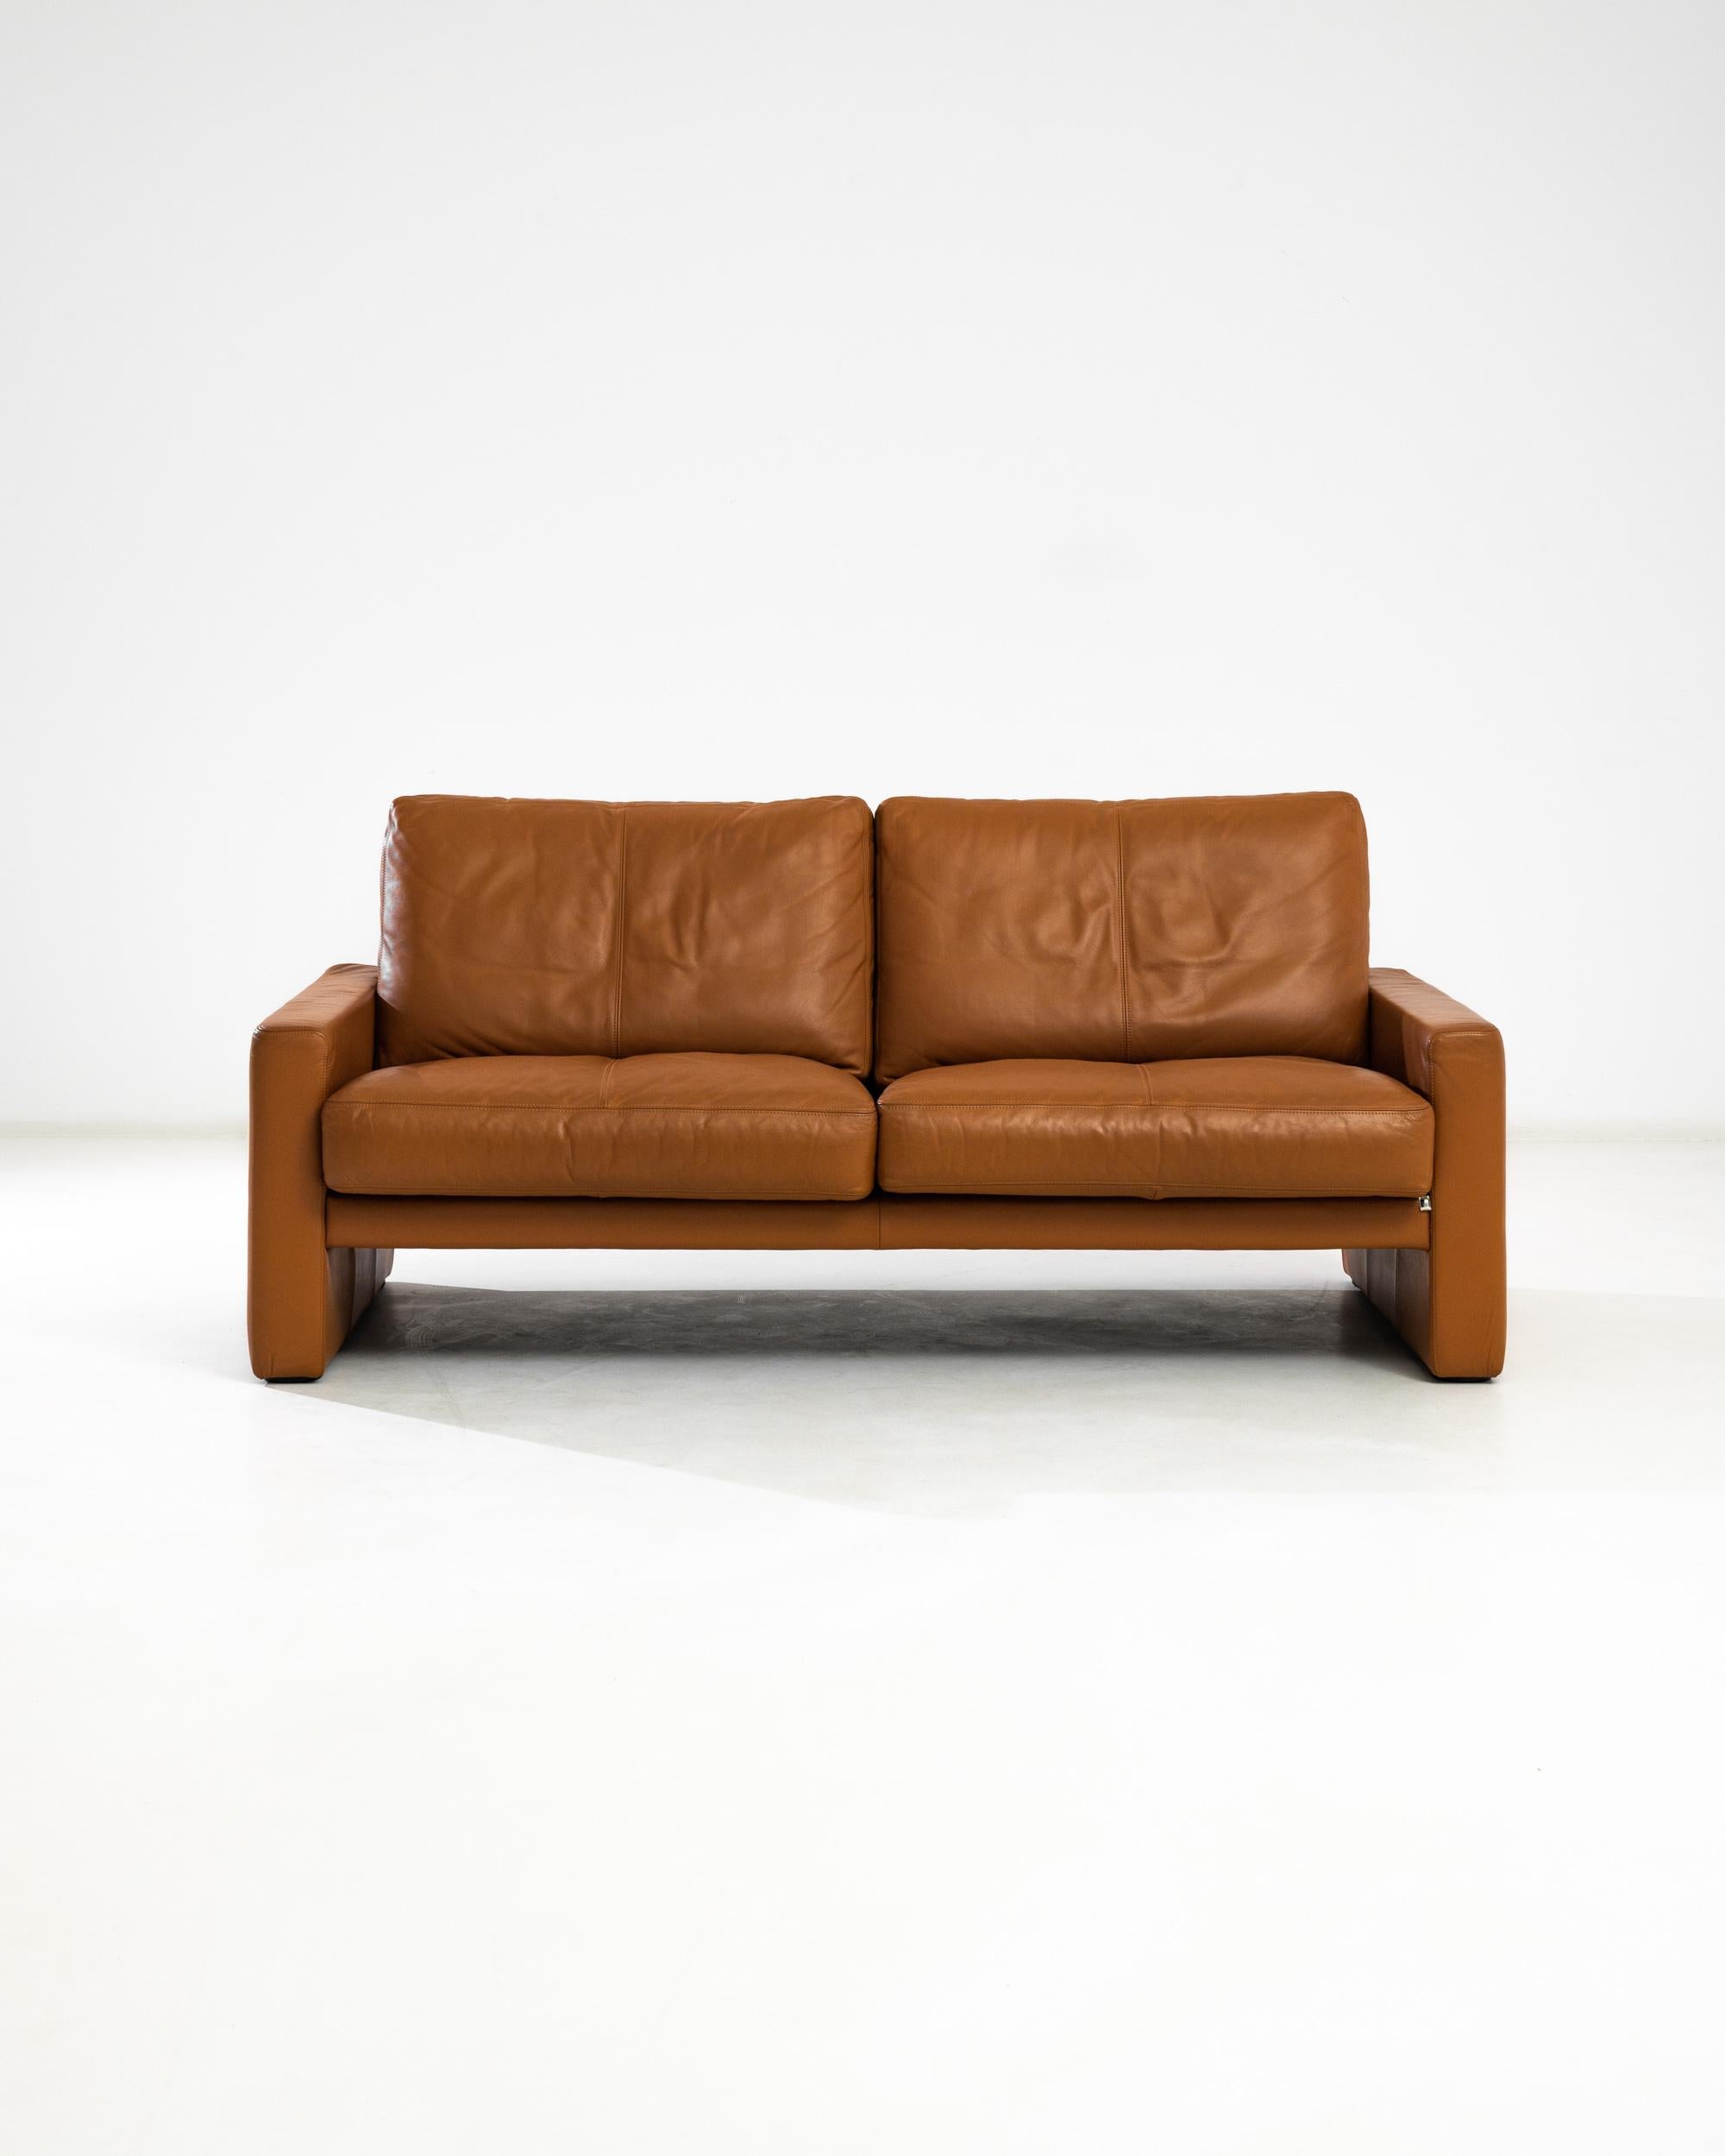 This two seat sofa was manufactured in the 20th century by the German furniture company WK Wohnen. Upholstered in high quality leather, it features comfortable plump seat cushions and smooth backrests supported by square arm panels on both sides.